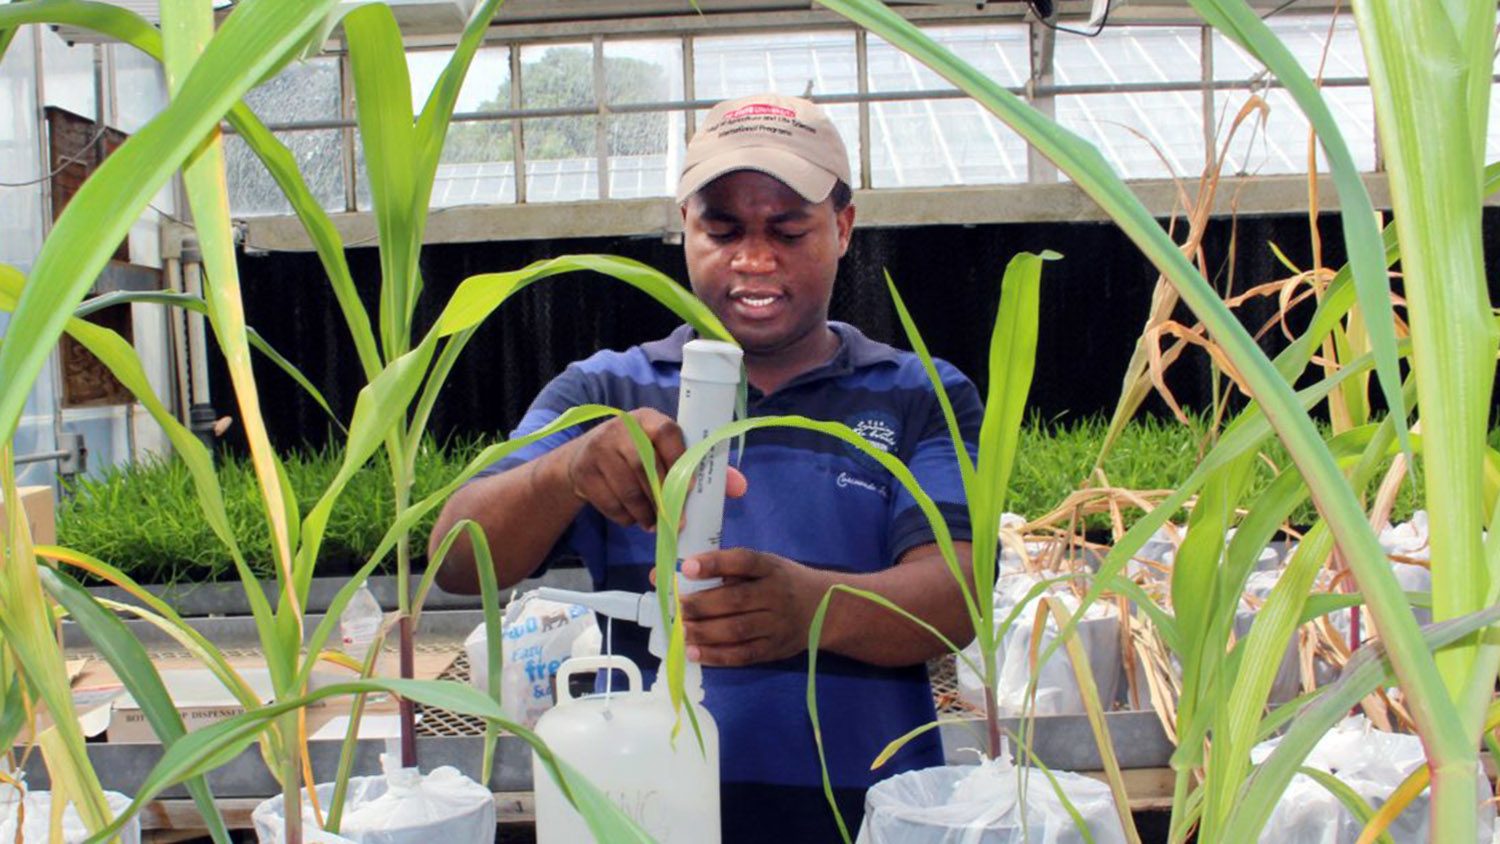 Mozambique professor studying at NC State works with plants in a greenhouse while wearing a hat.